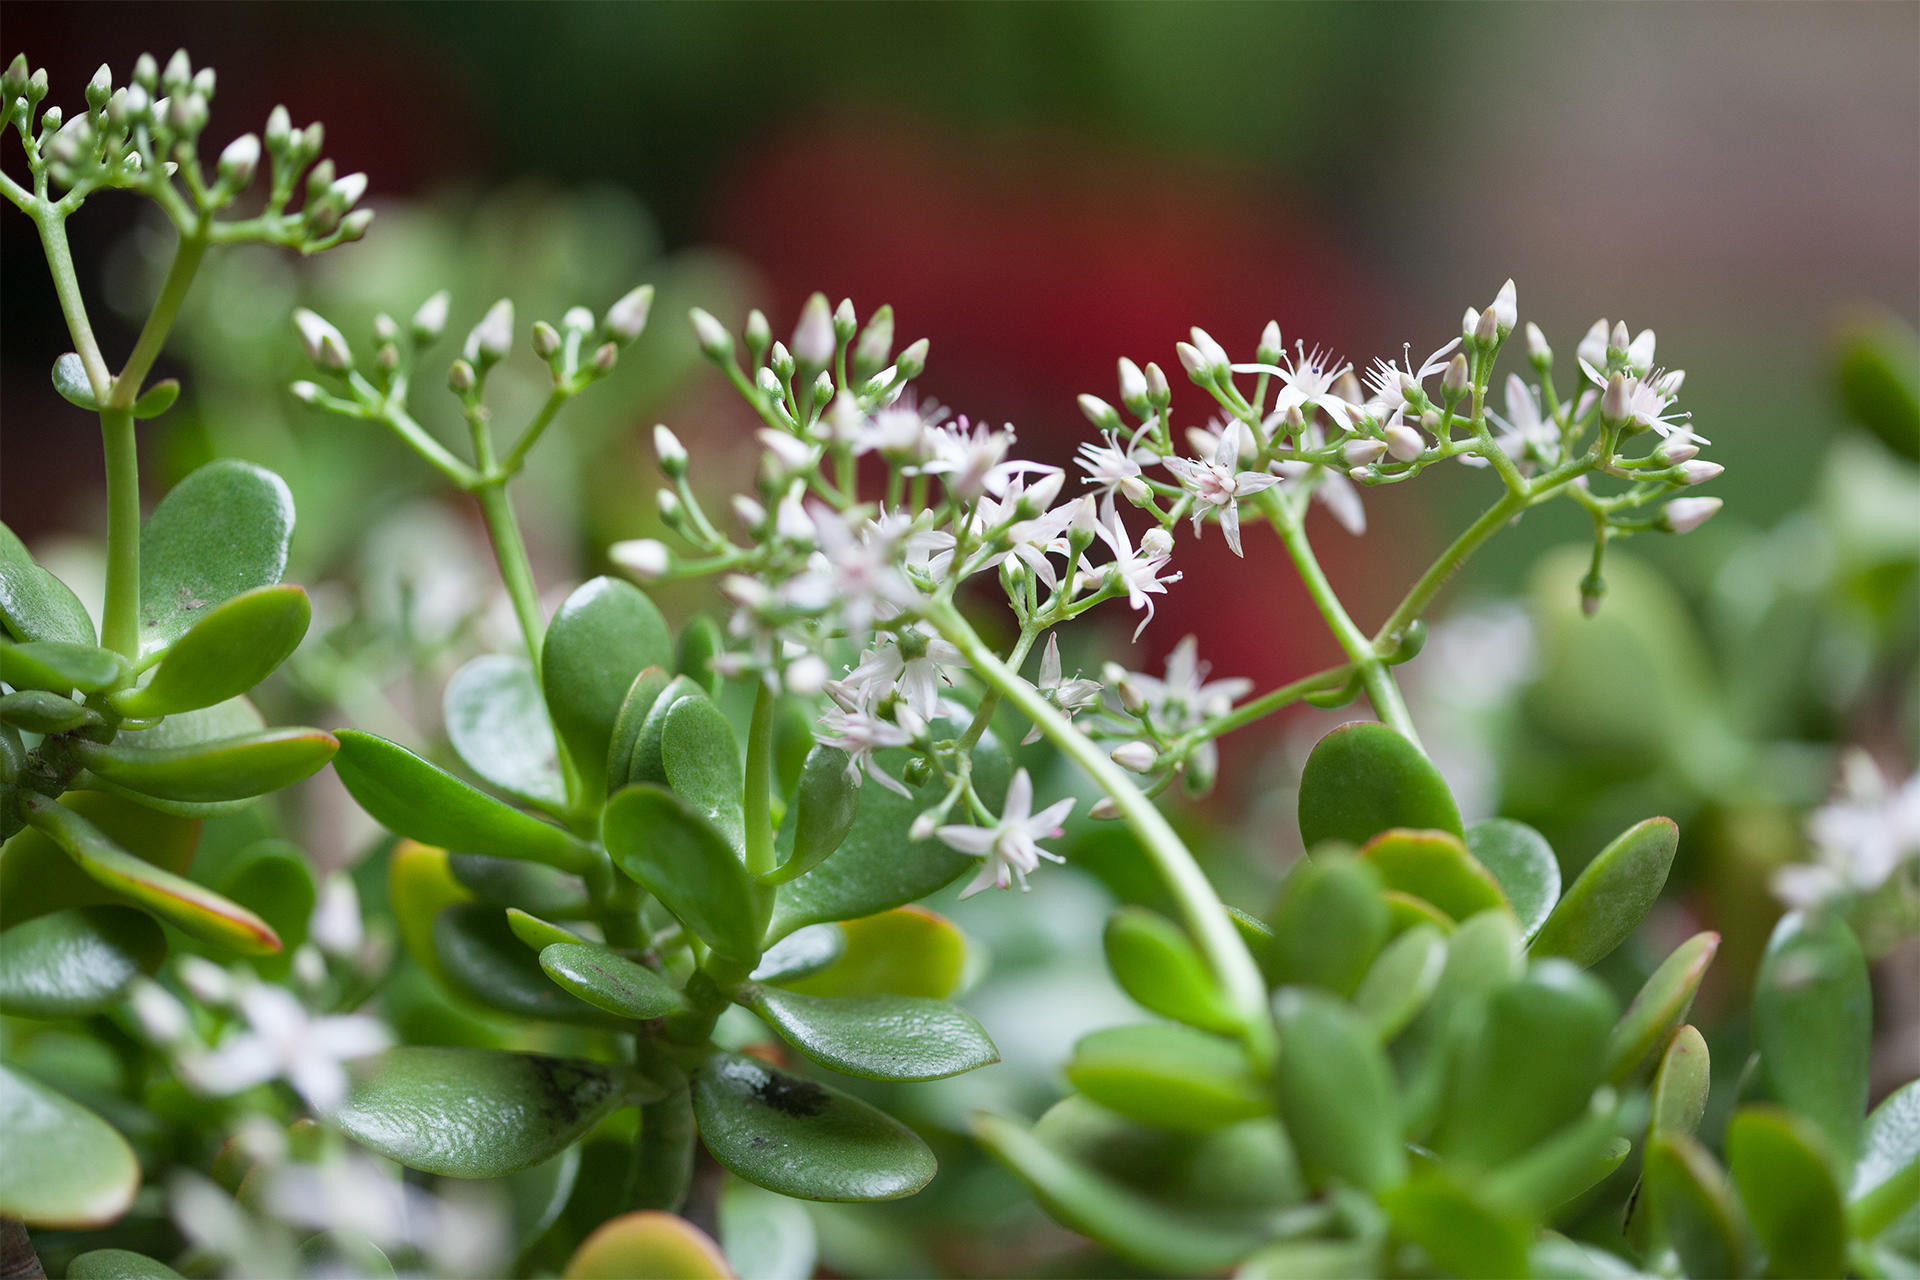 Green leaves of a jade plant with small pink, star-shaped flowers